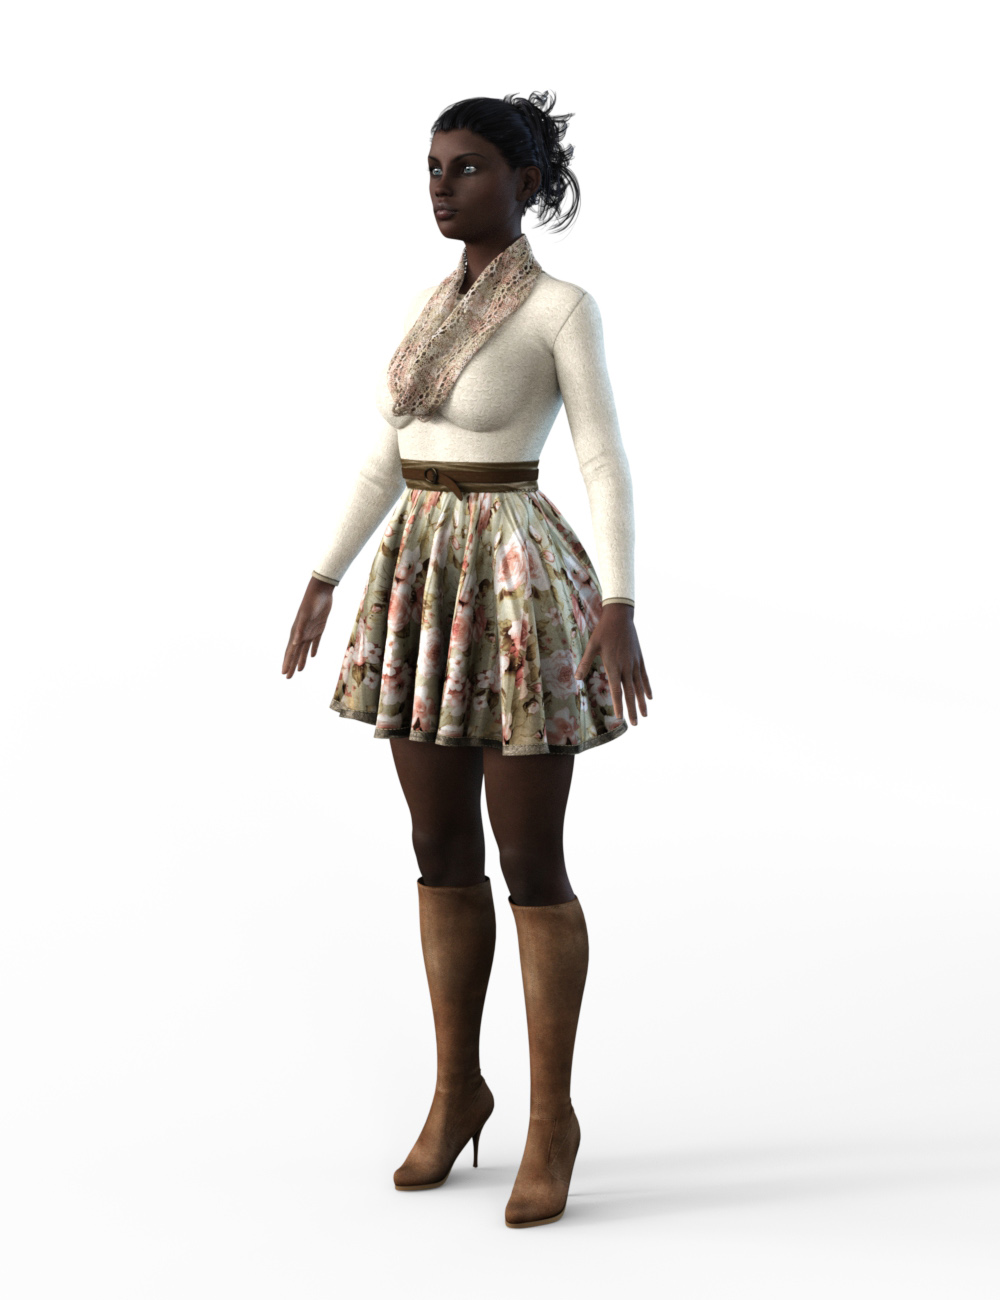 FBX- Lynsey First Date Outfit by: Paleo, 3D Models by Daz 3D